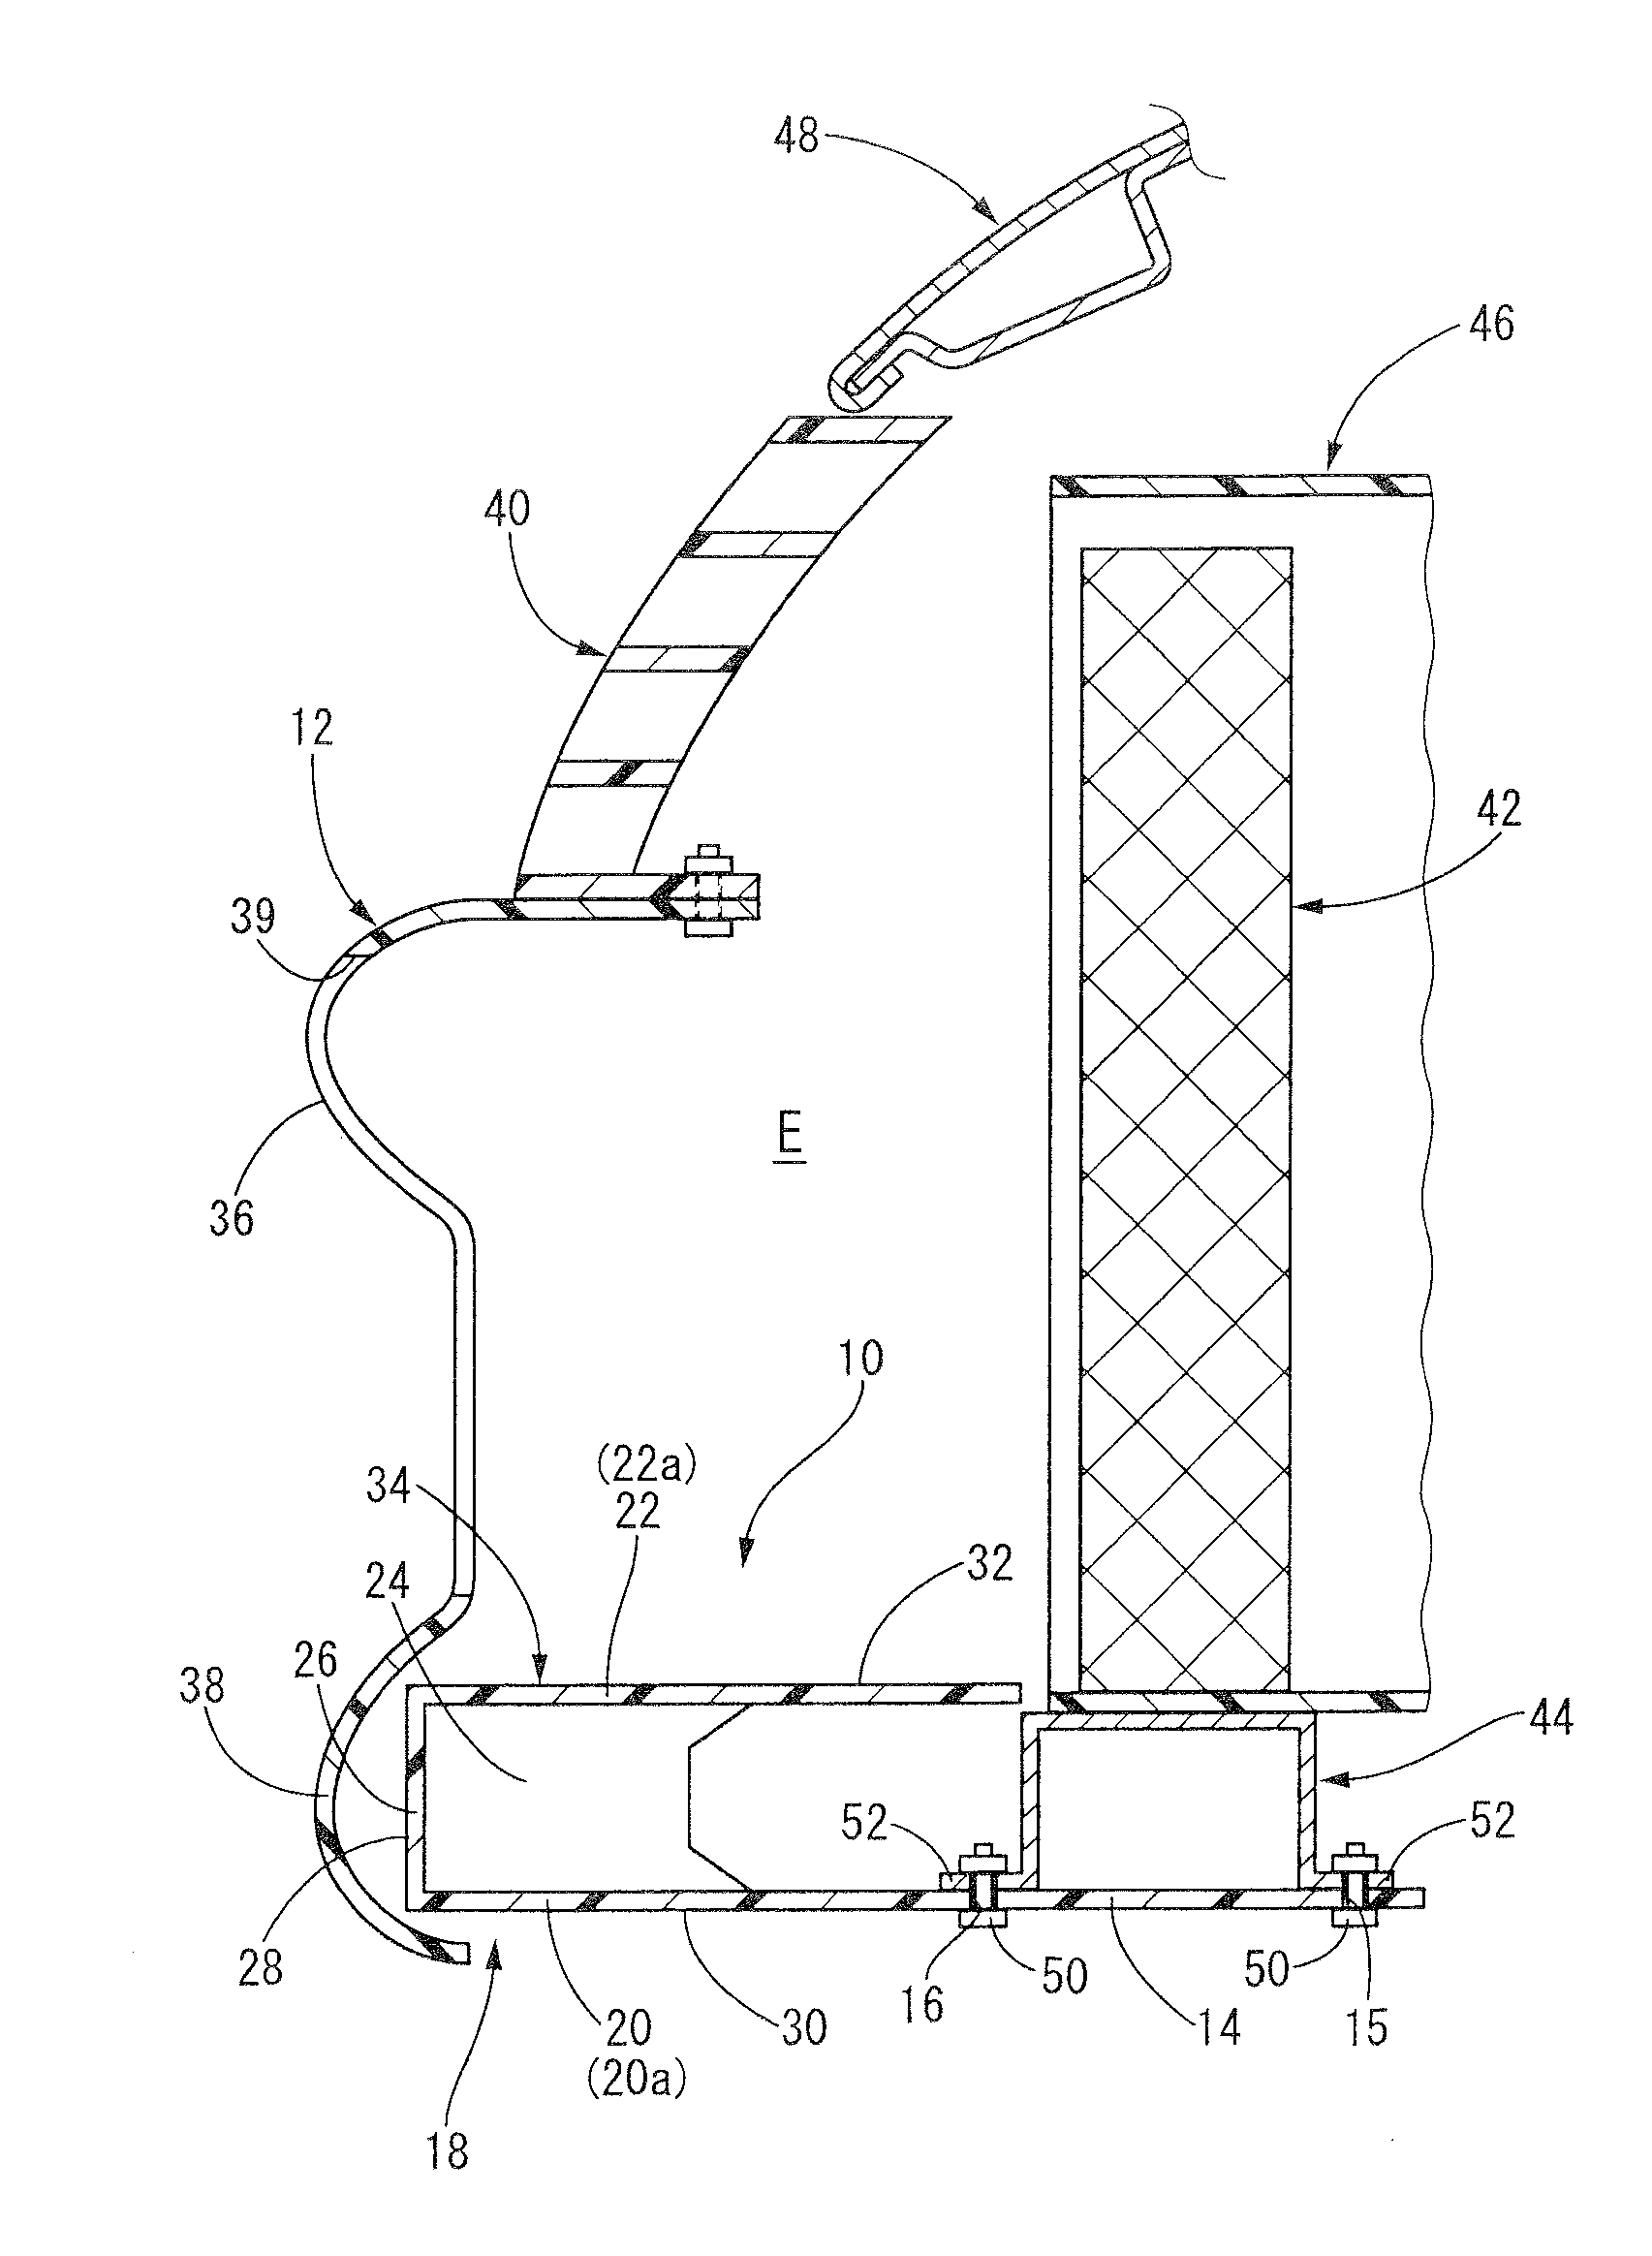 Pedestrian protection apparatus for vehicle